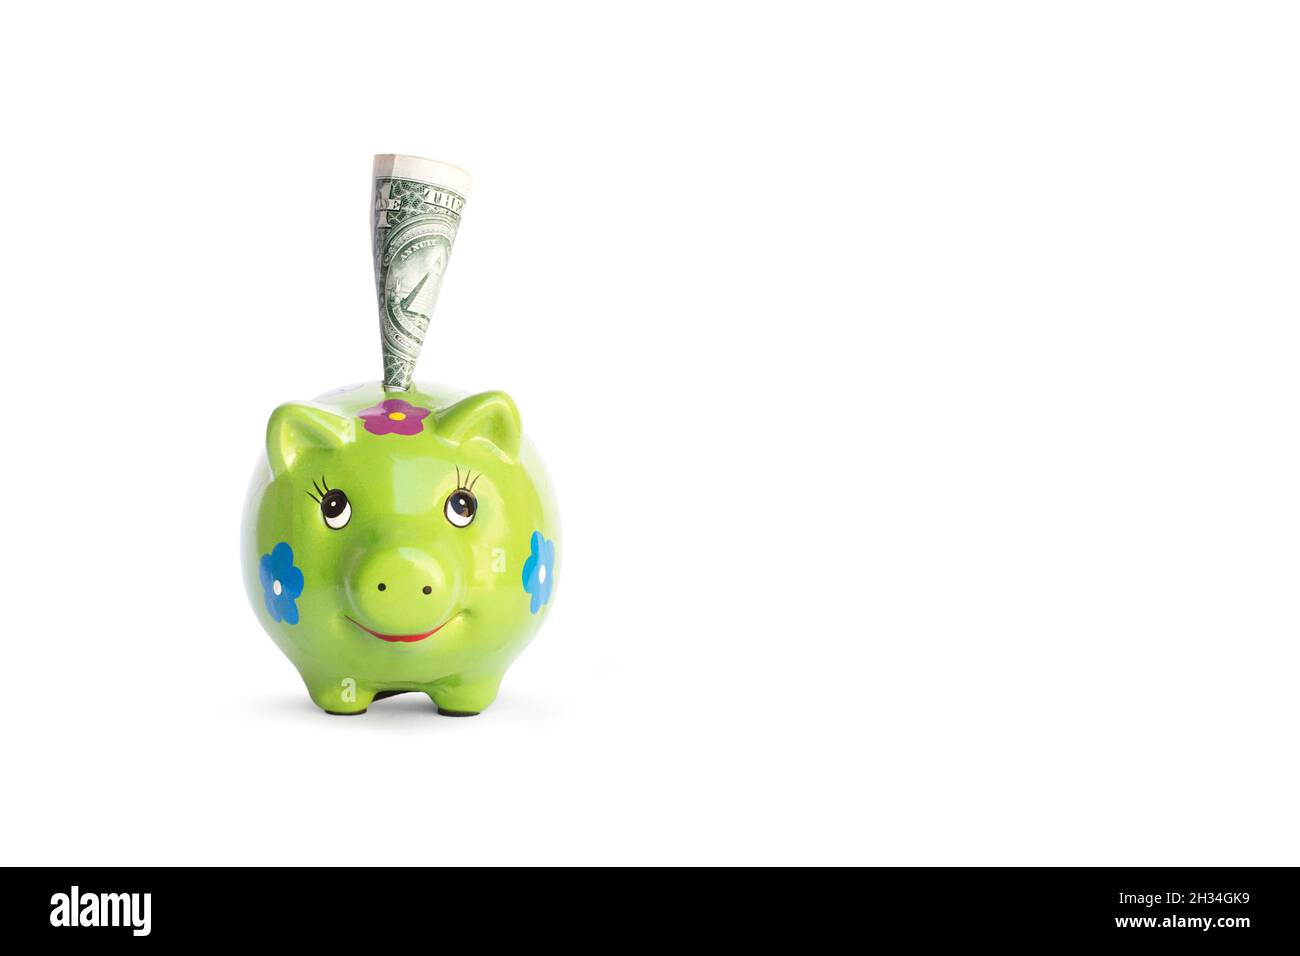 Green piggy bank and one dolar bill on a white background with copy space Stock Photo